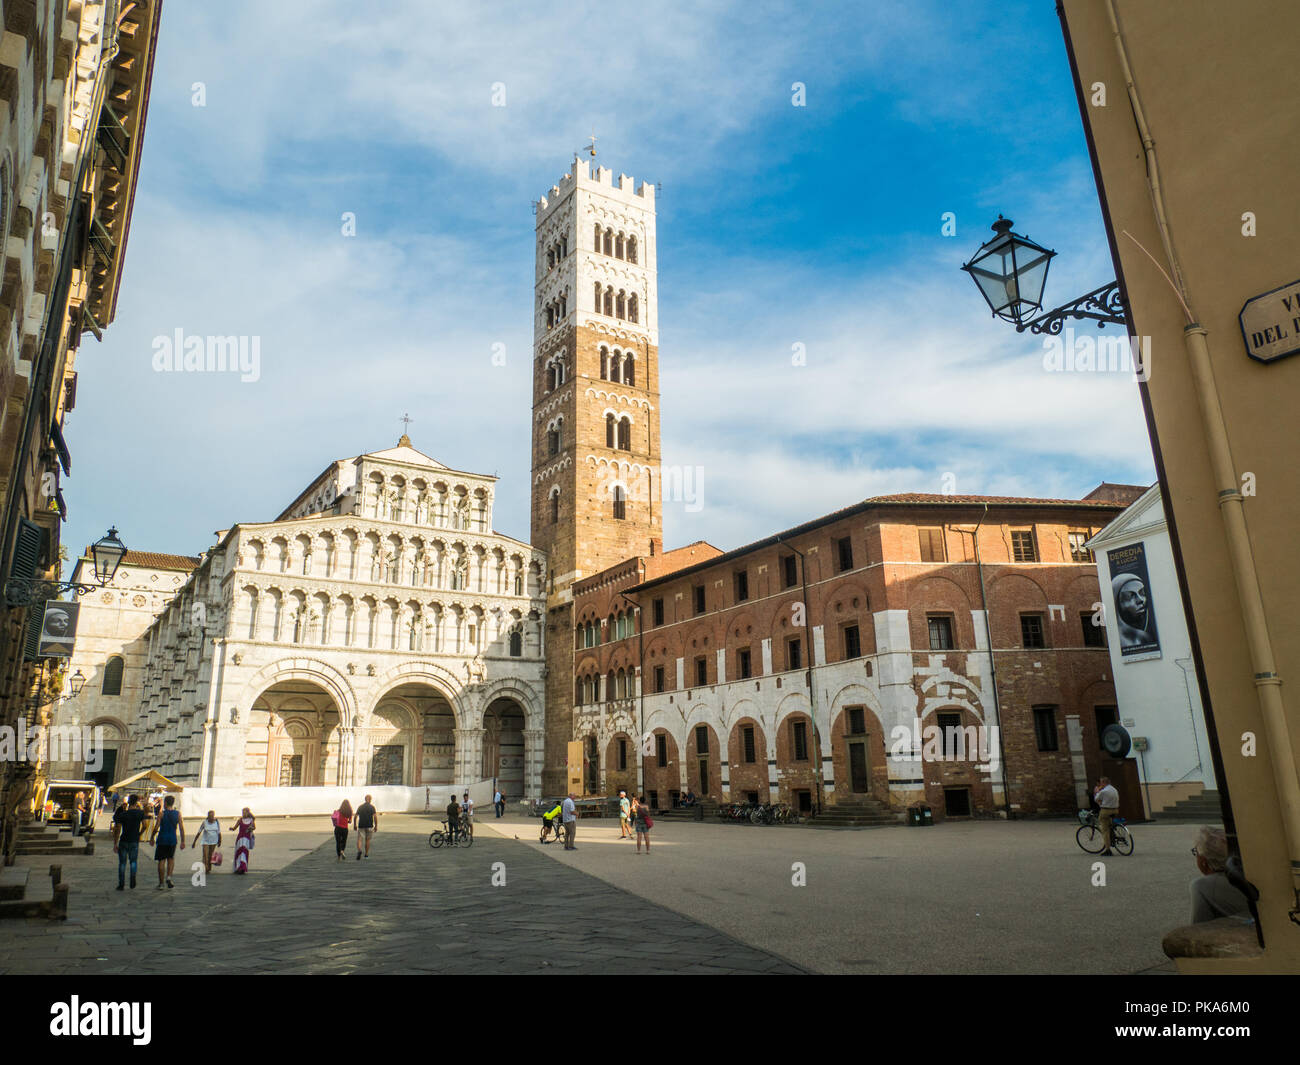 Cathedral of San Martino (St Martin) in Piazza Antelminelli, Lucca, Tuscany, Italy Stock Photo